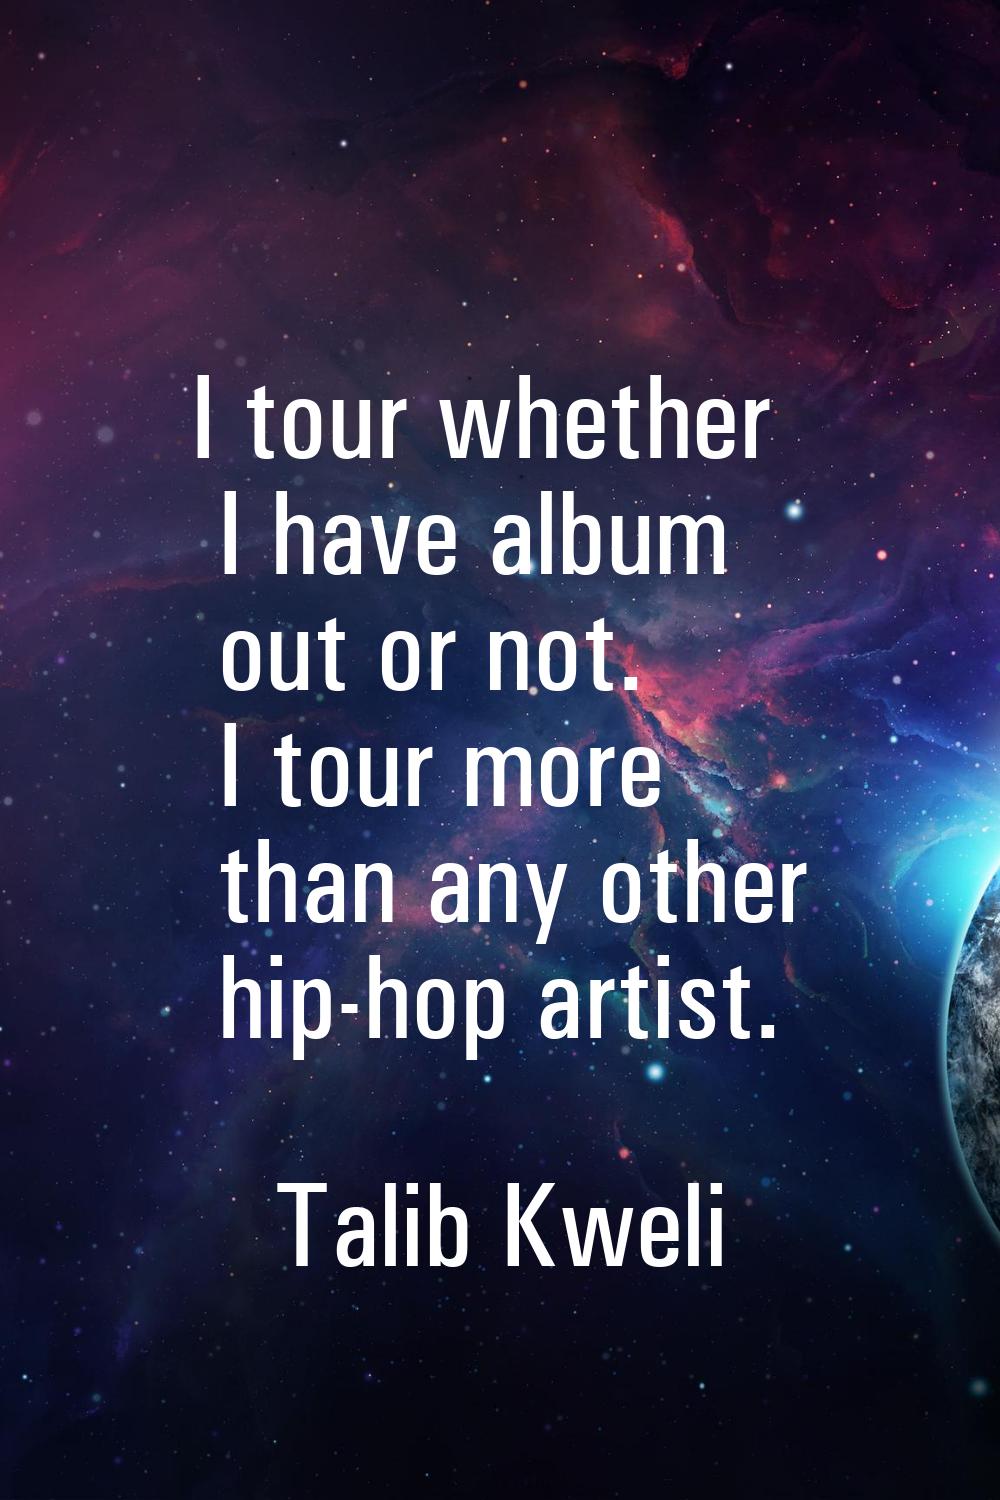 I tour whether I have album out or not. I tour more than any other hip-hop artist.